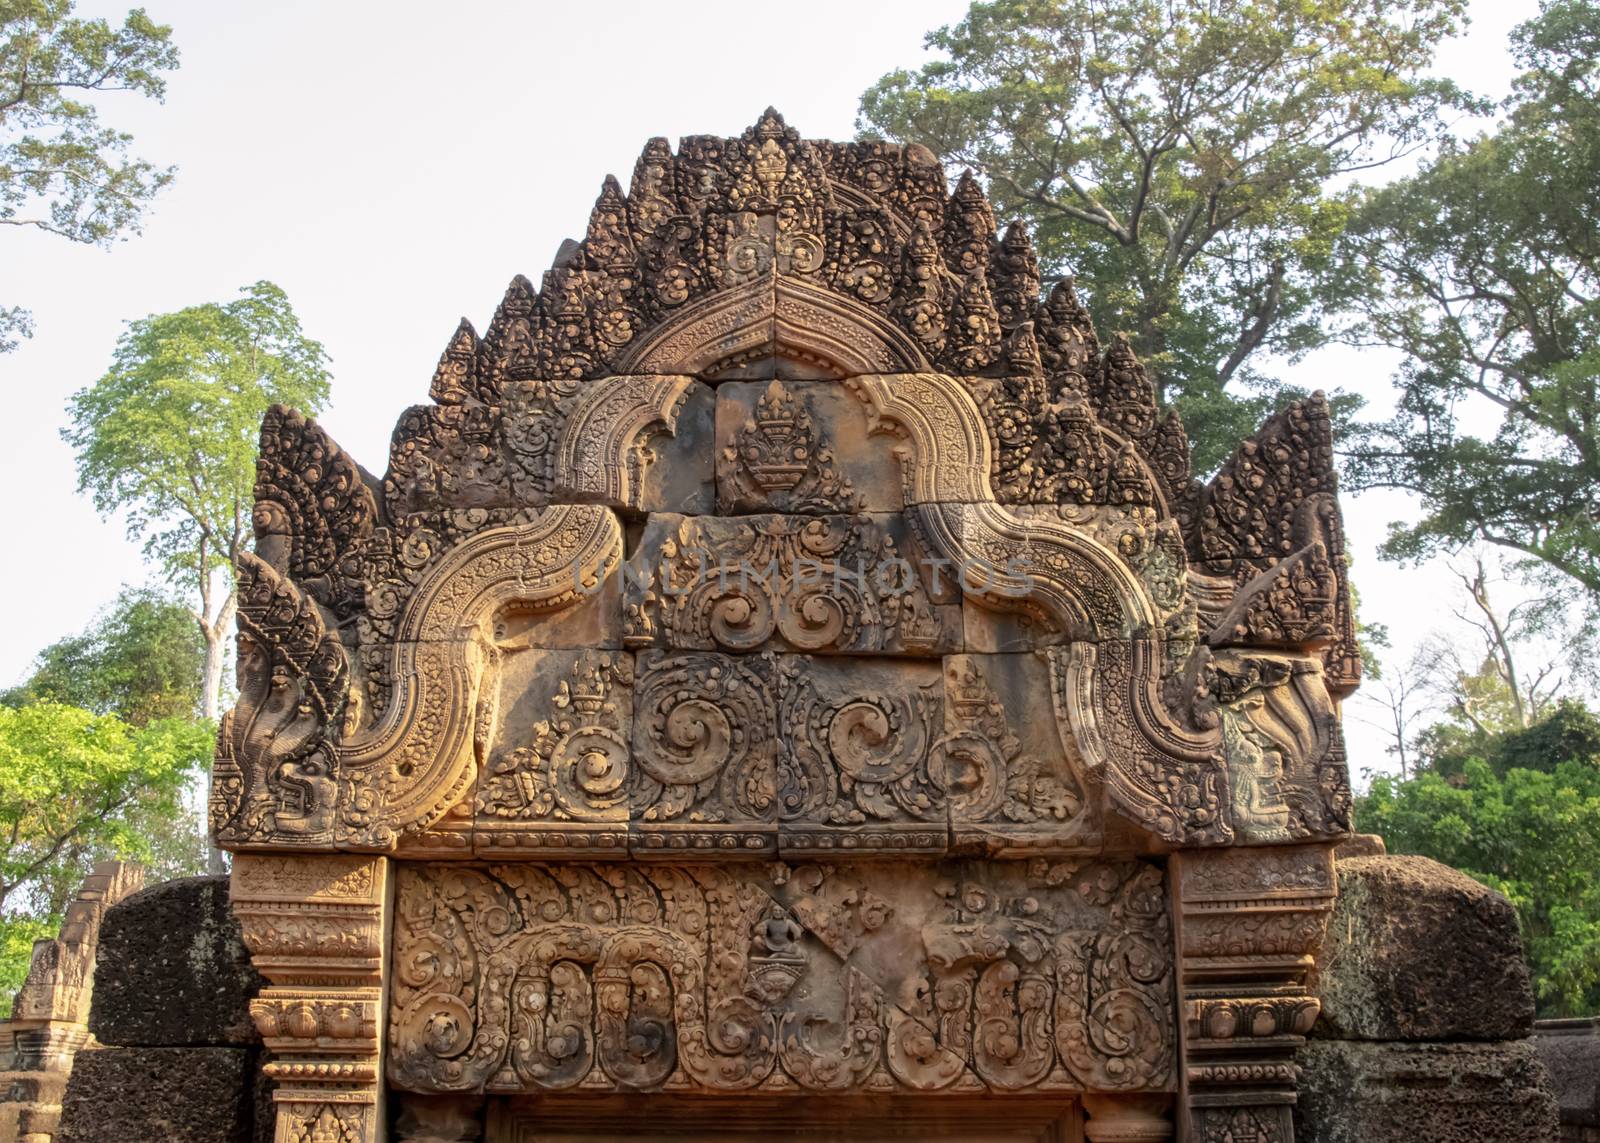 Cambodia, Banteay Seay - March 2016 - Decorative lintels in reconstructed ruins of ornately carved 10th-century, red sand stone, temple dedicated to the Hindu god Shiva, bathed in the early morning light